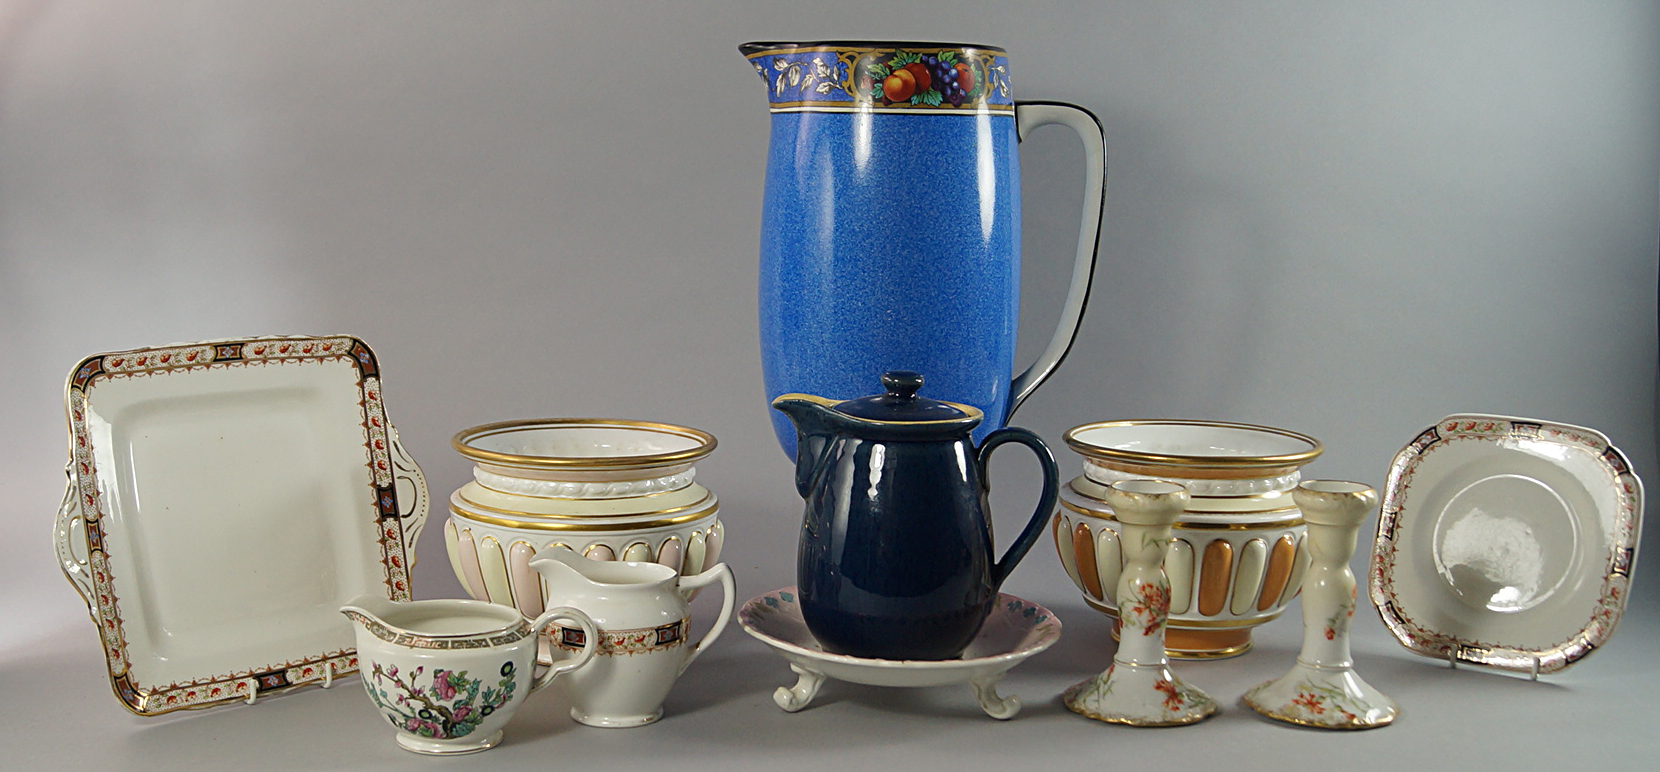 Two Wedgwood jardinieres, late 19th/early 20th century, both with lobed moulded decoration,